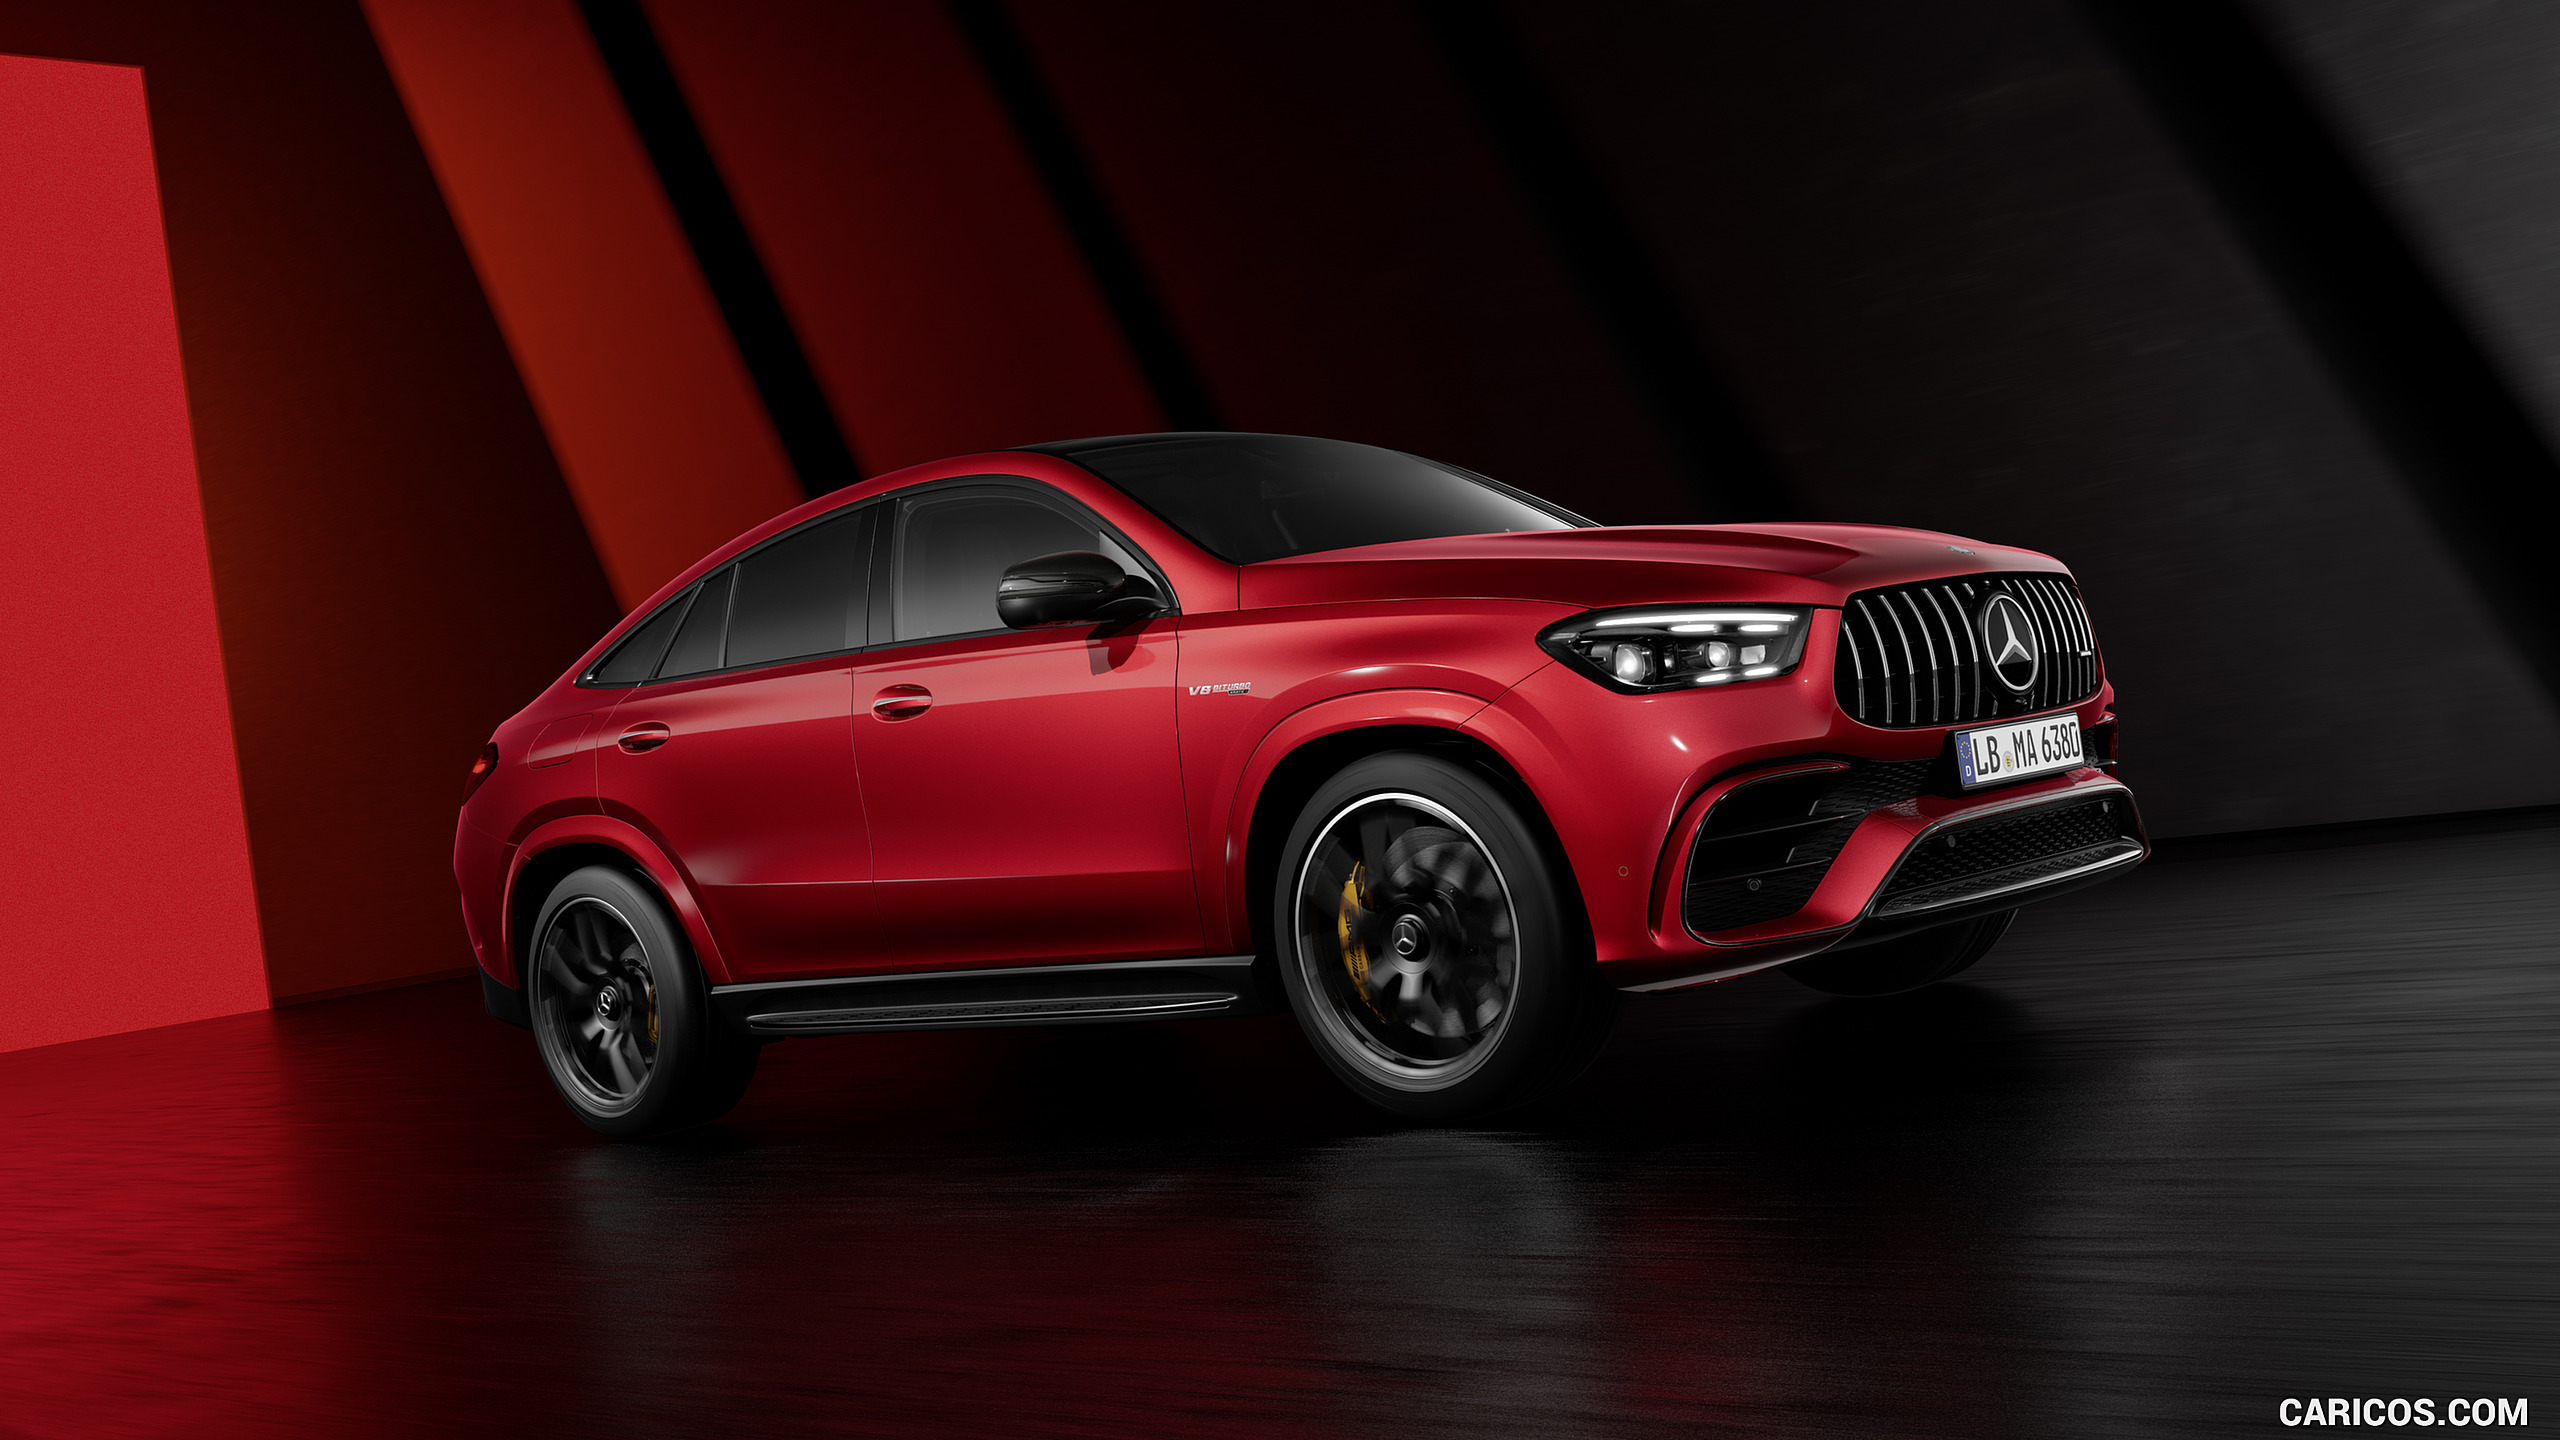 2024 MercedesAMG GLE 63 S Coupe Front ThreeQuarter Caricos